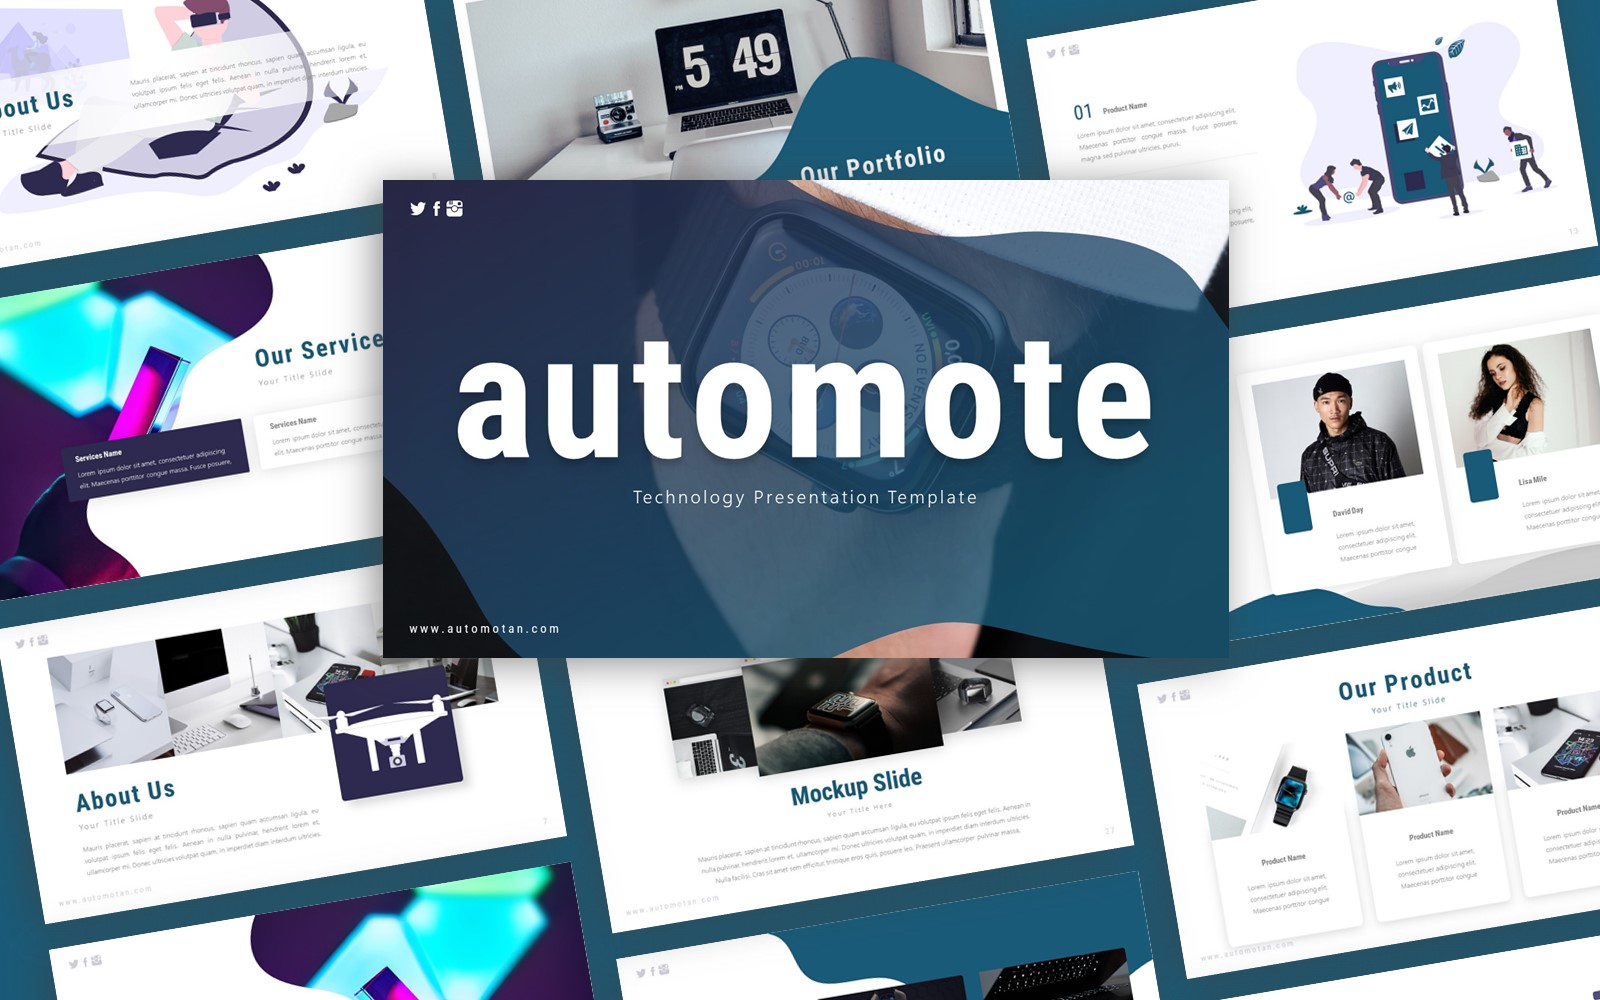 Automote Technology Presentation PowerPoint template